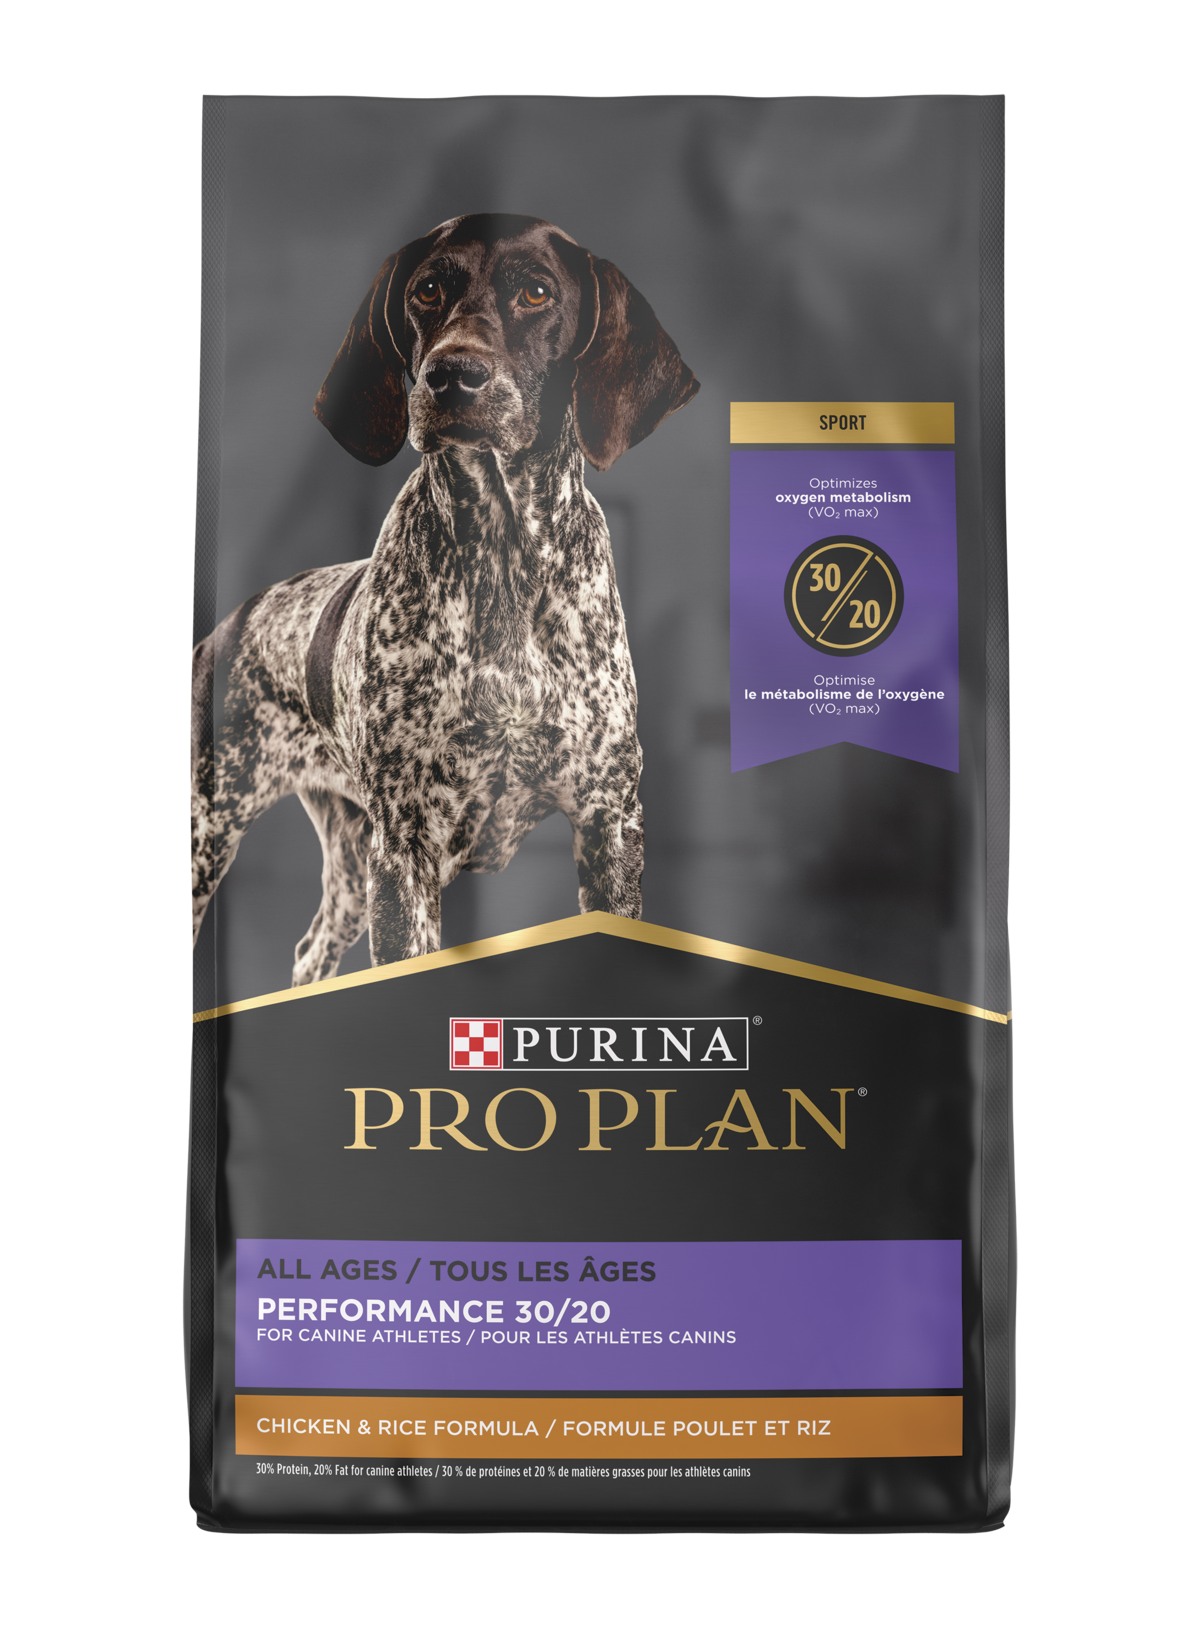 Purina Pro Plan All Ages Sport Performance 30/20 Chicken & Rice Formula, 37.5 lbs